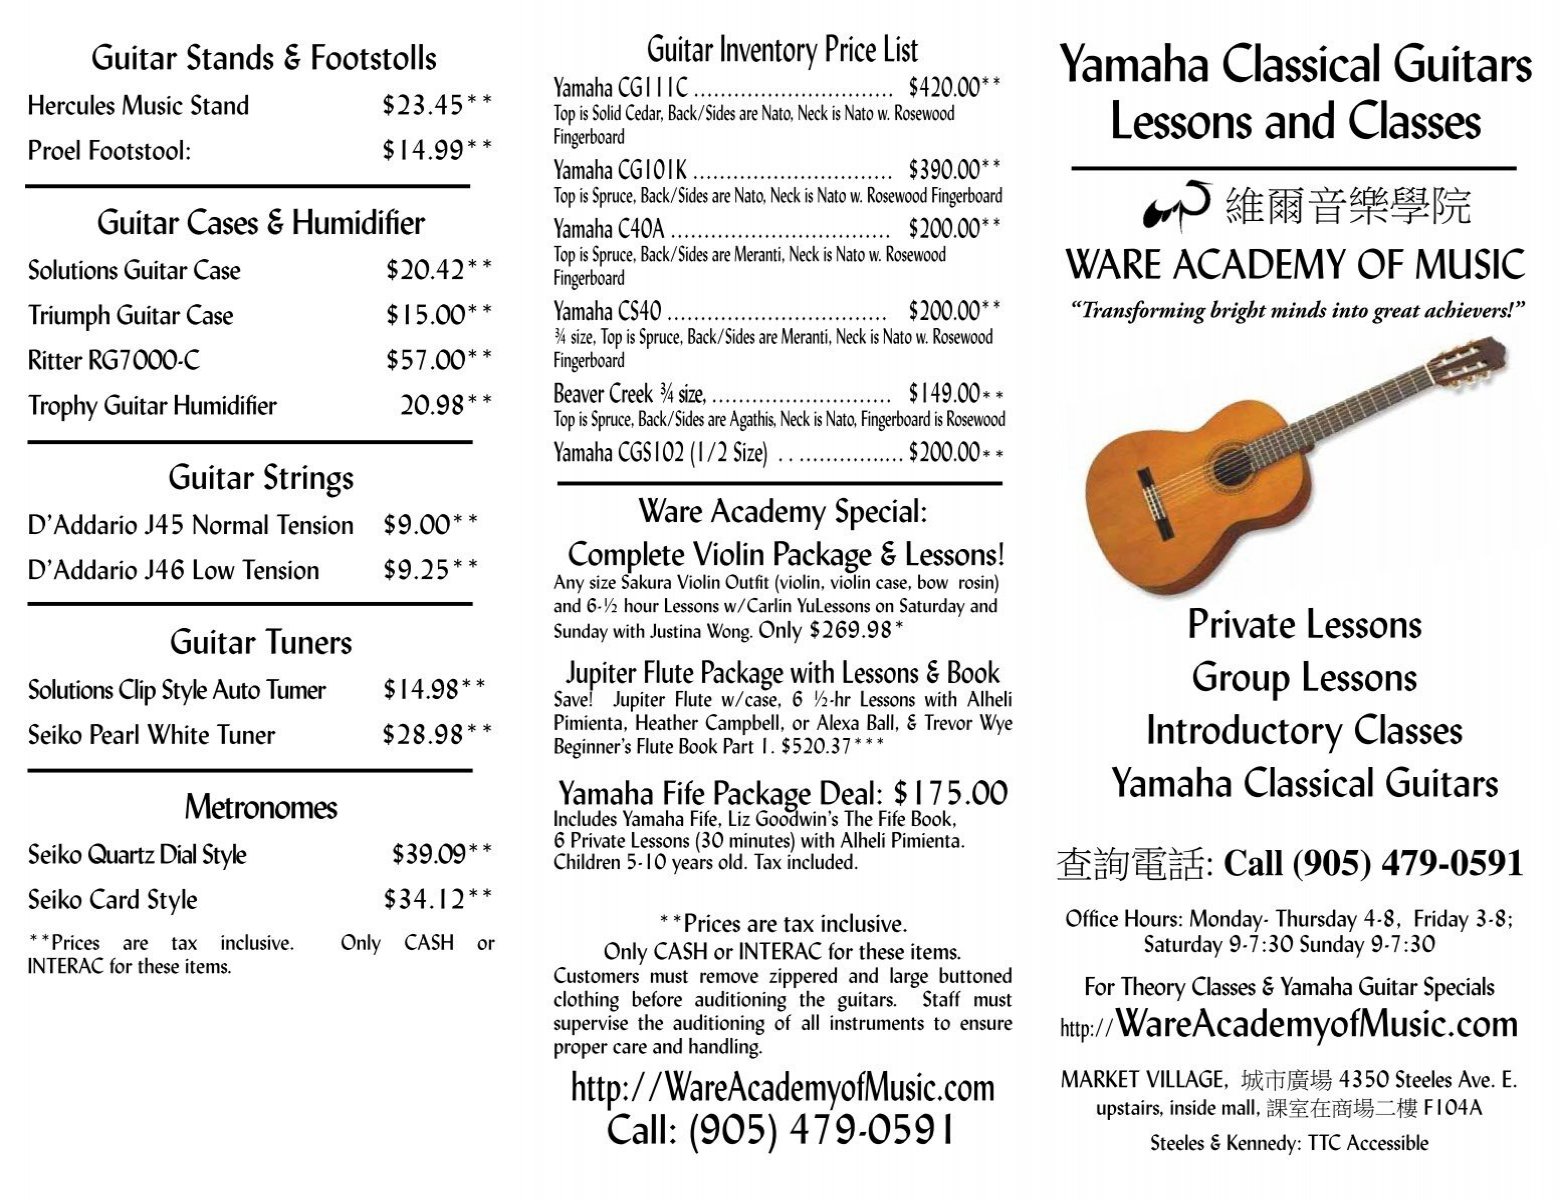 Yamaha Classical Guitars Lessons and Classes - Ware Academy of ...